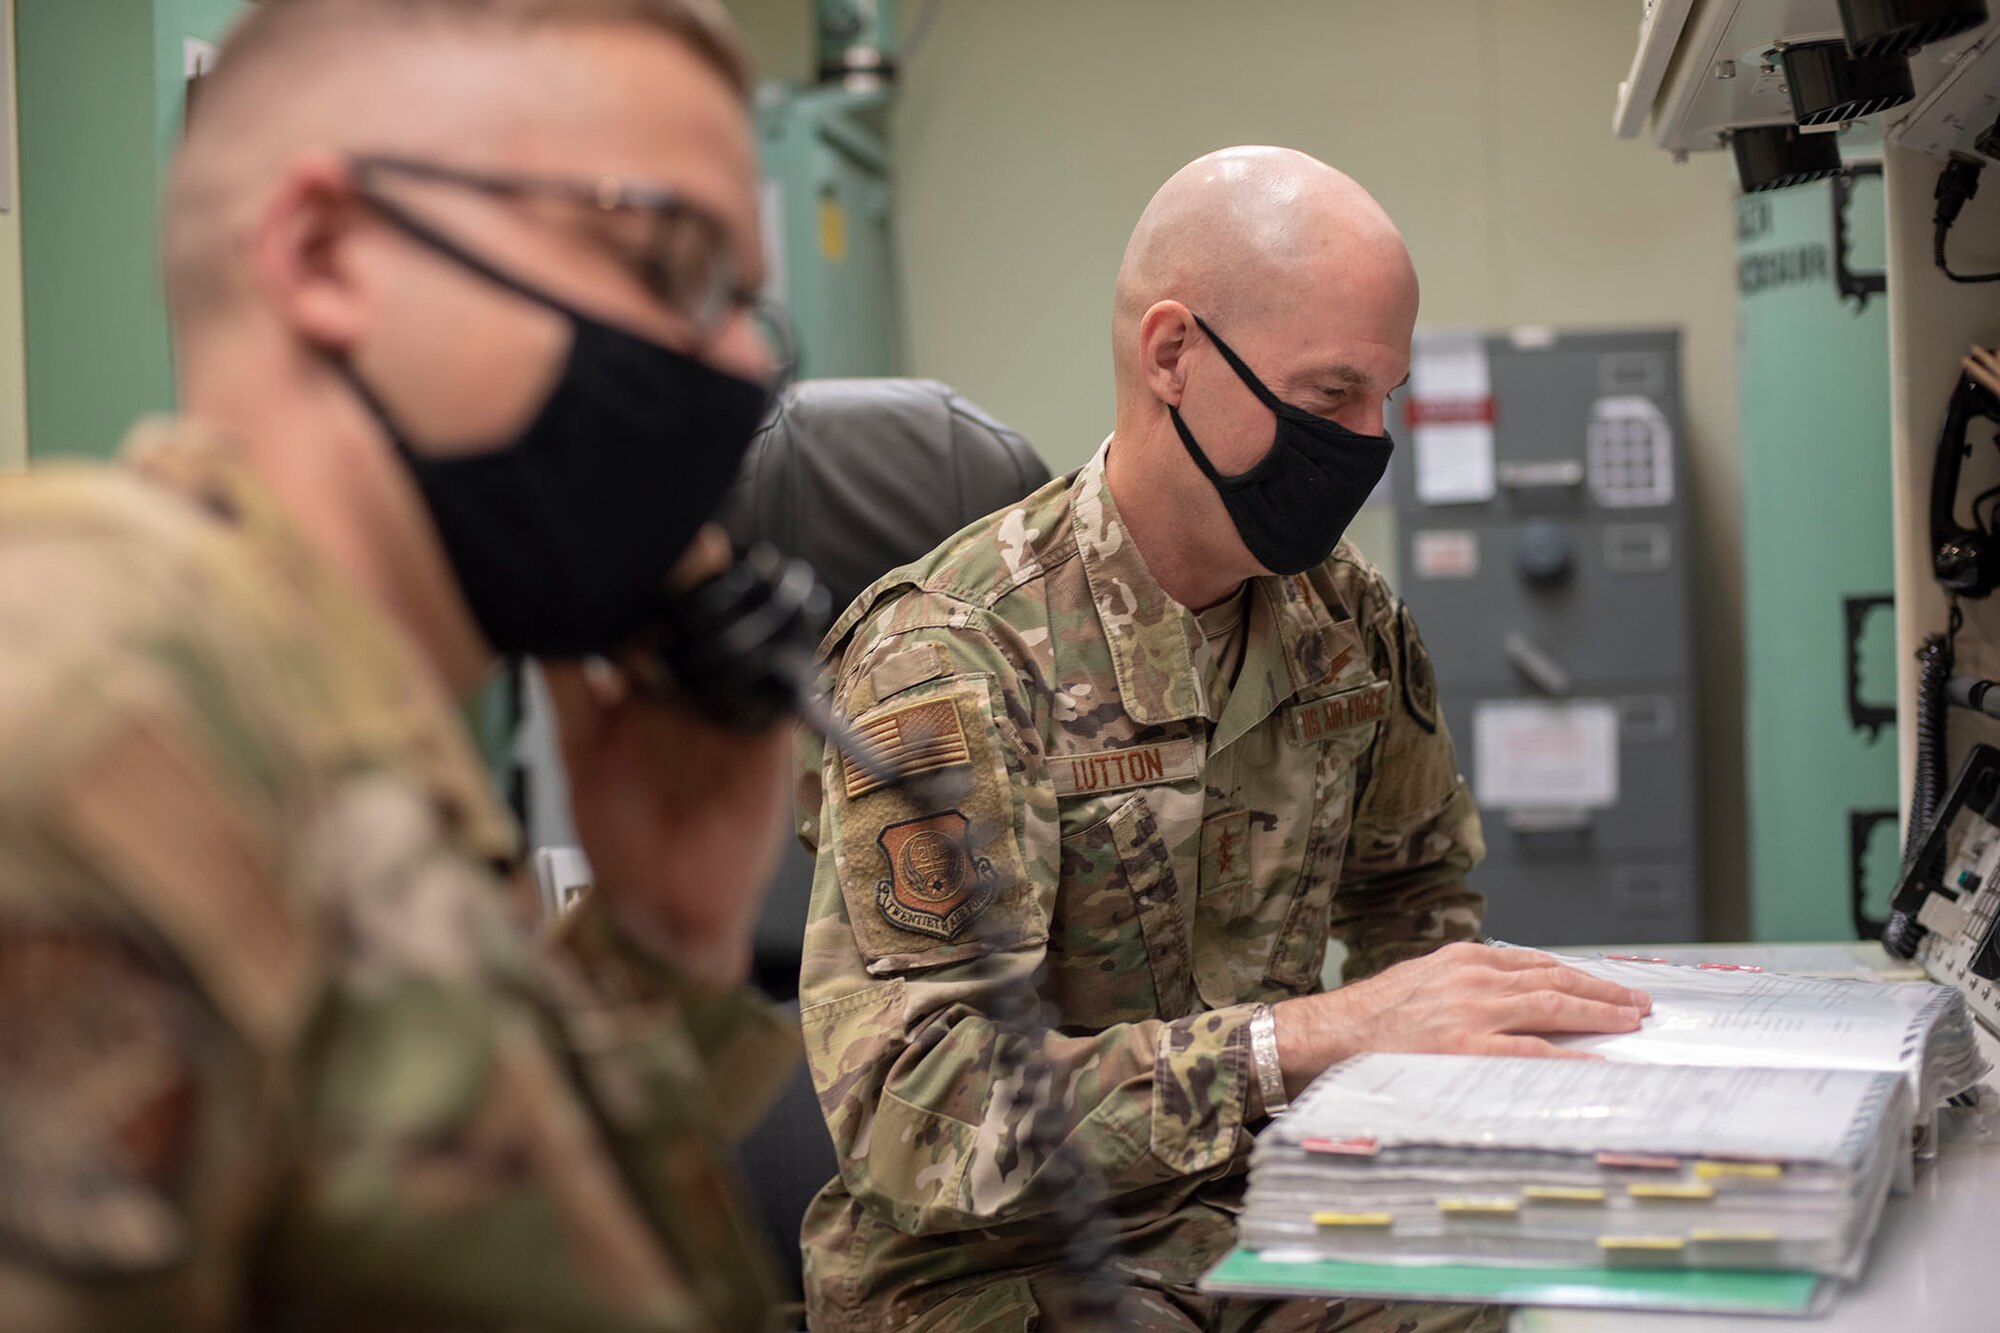 Maj. Gen. Michael J. Lutton, 20th Air Force commander, looks through launch procedures inside of the missile procedure trainer next to Capt. Mitchell Baugh, intercontinental ballistic missile combat crew commander May 12, 2021, during his trip to Malmstrom Air Force Base, Mont.